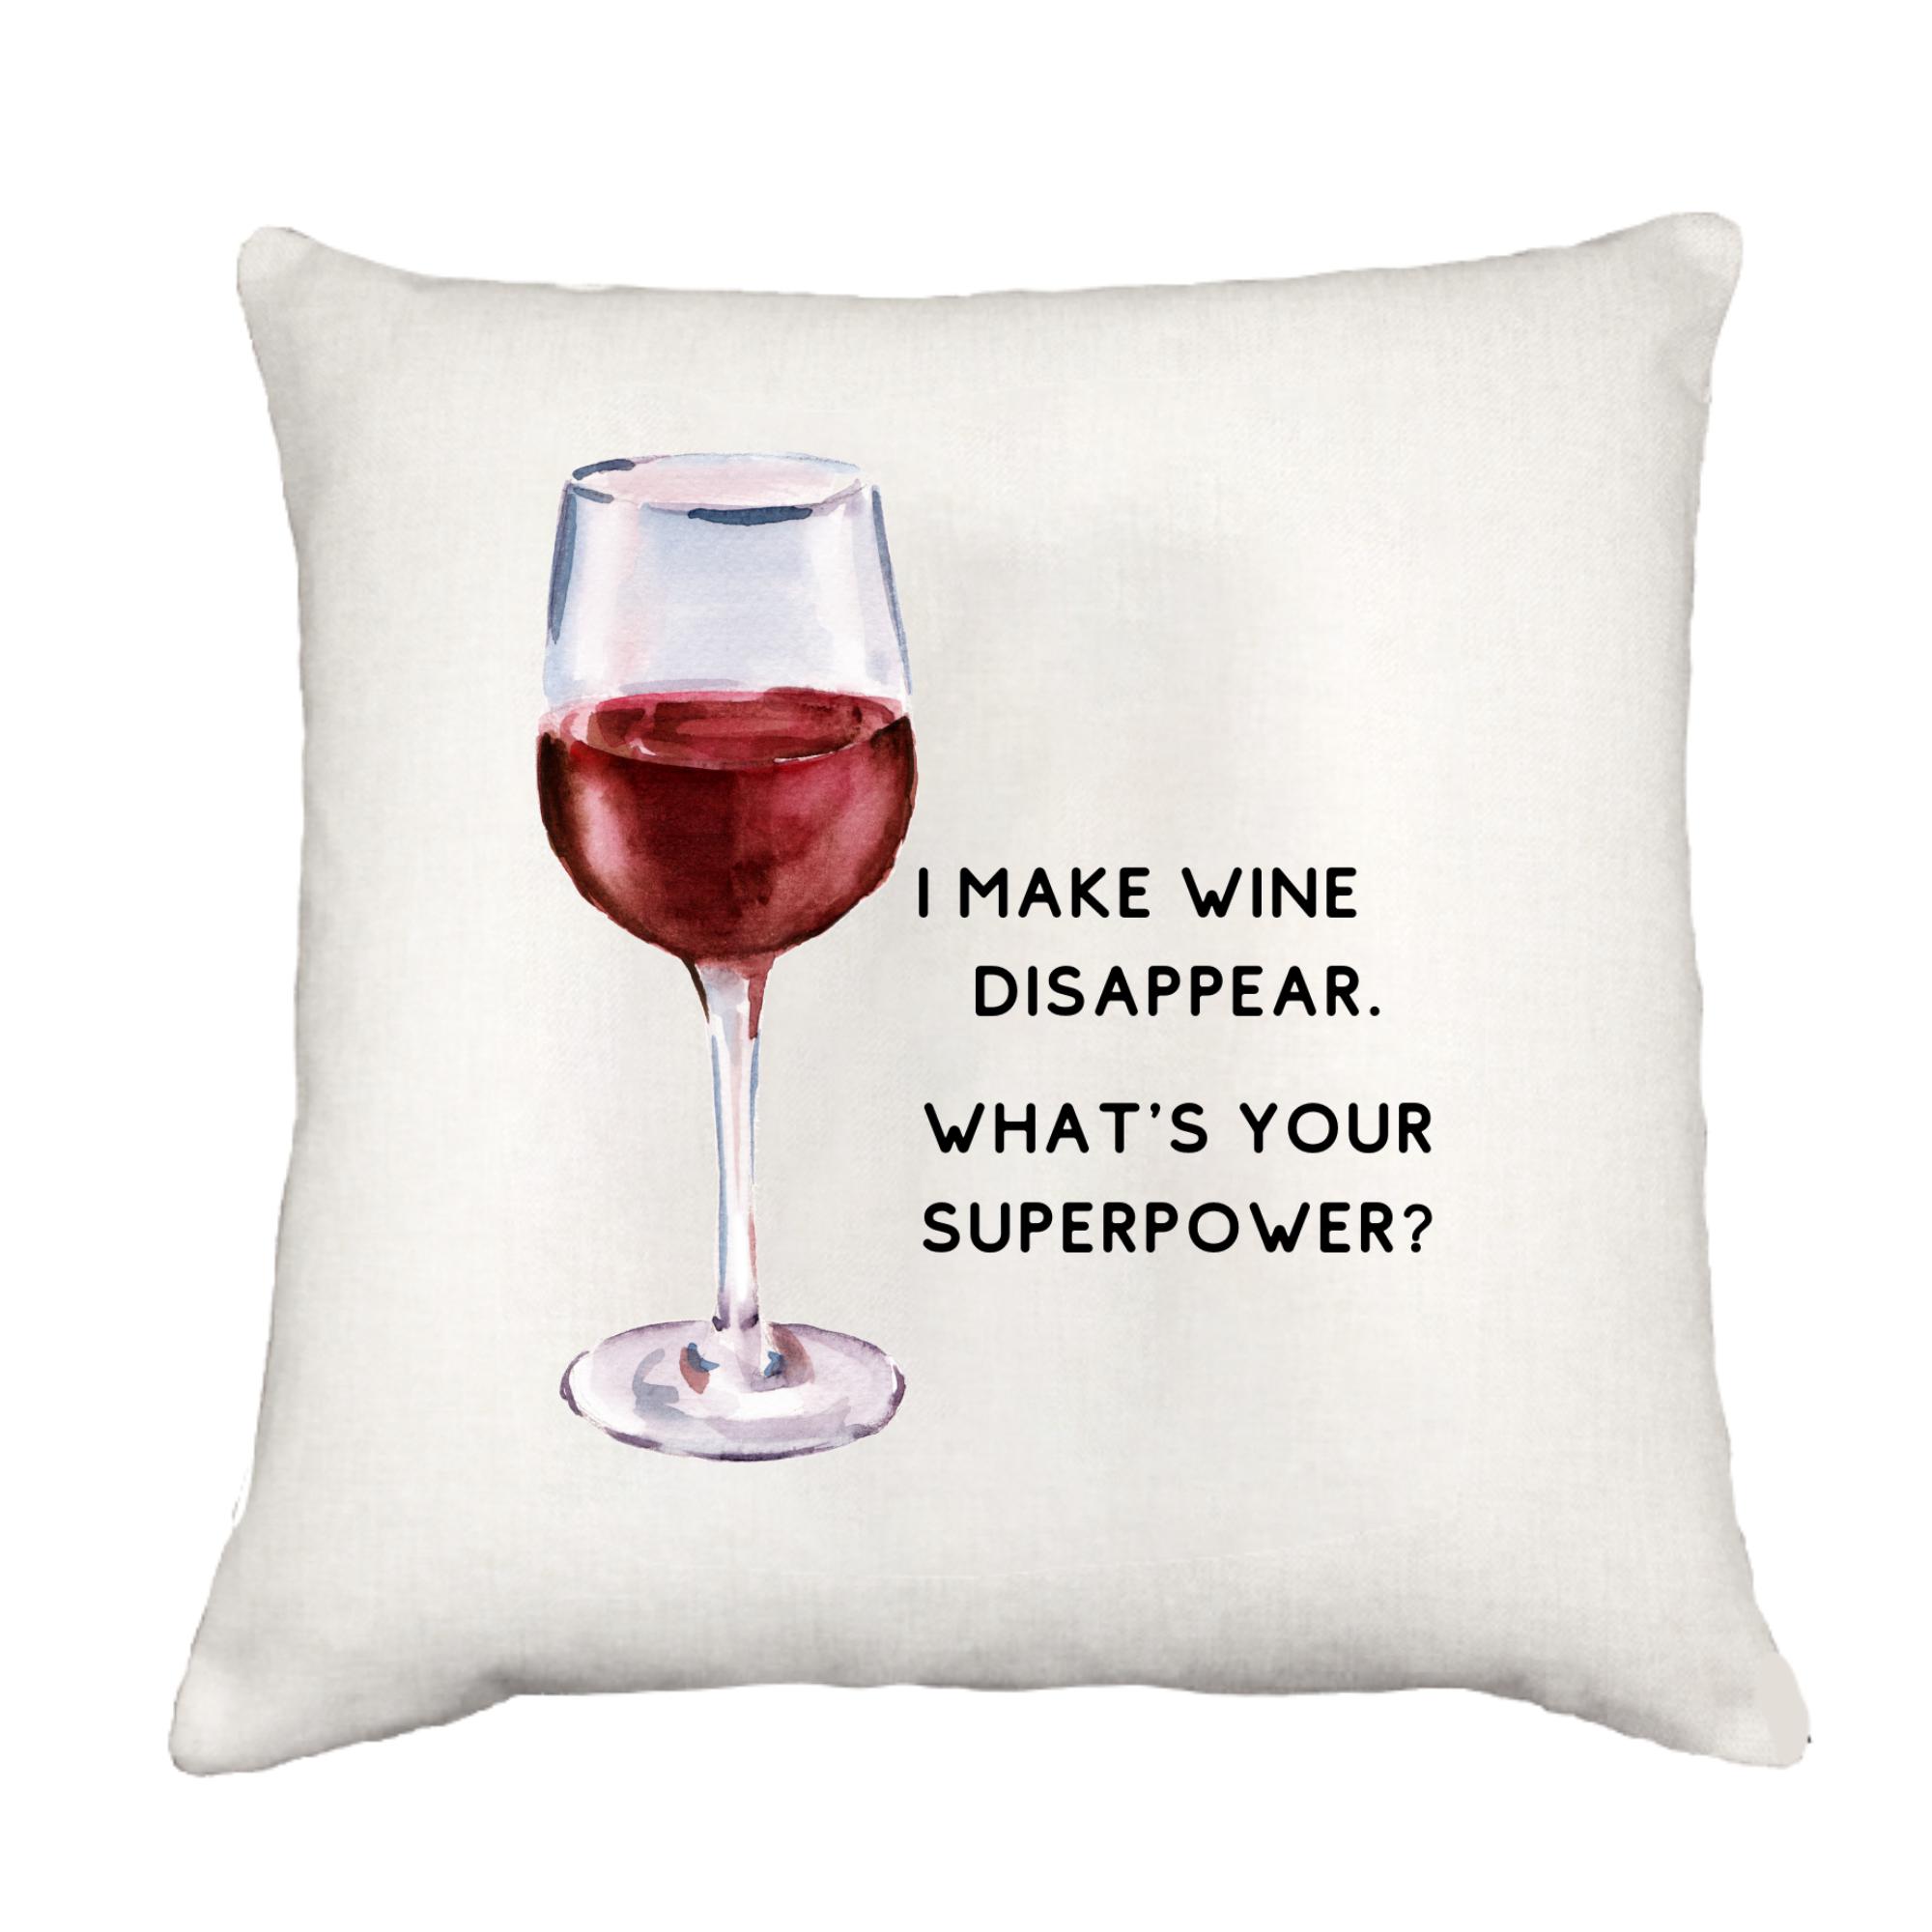 Wine Disappear Down Pillow Throw/Decorative Pillow - Southern Sisters